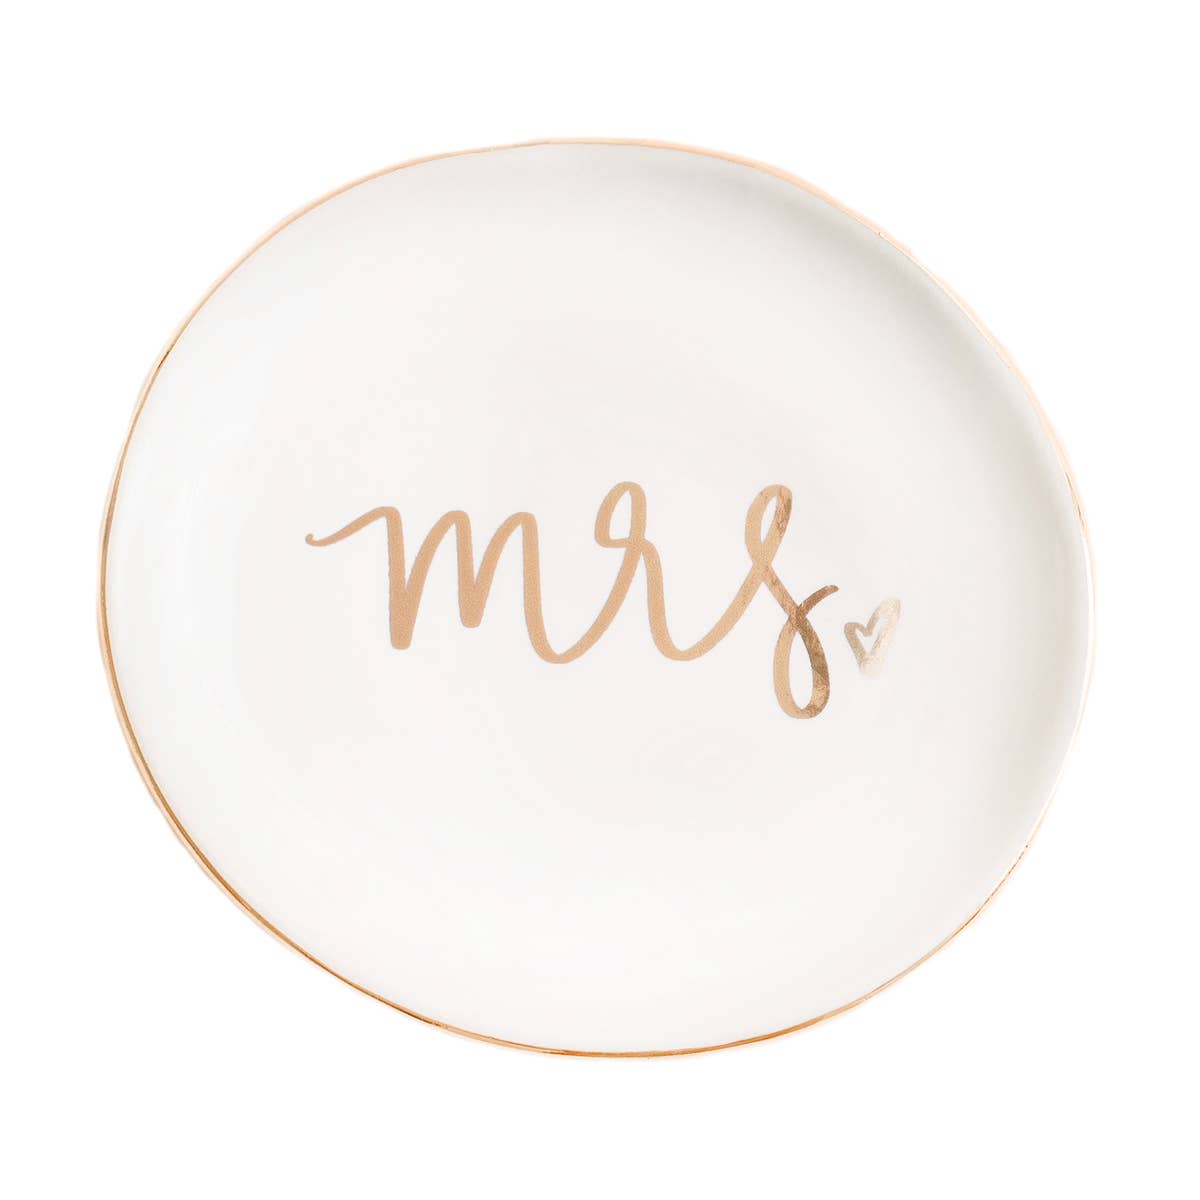 Mrs. Jewelry Dish - White and Gold Foil - 4x4"